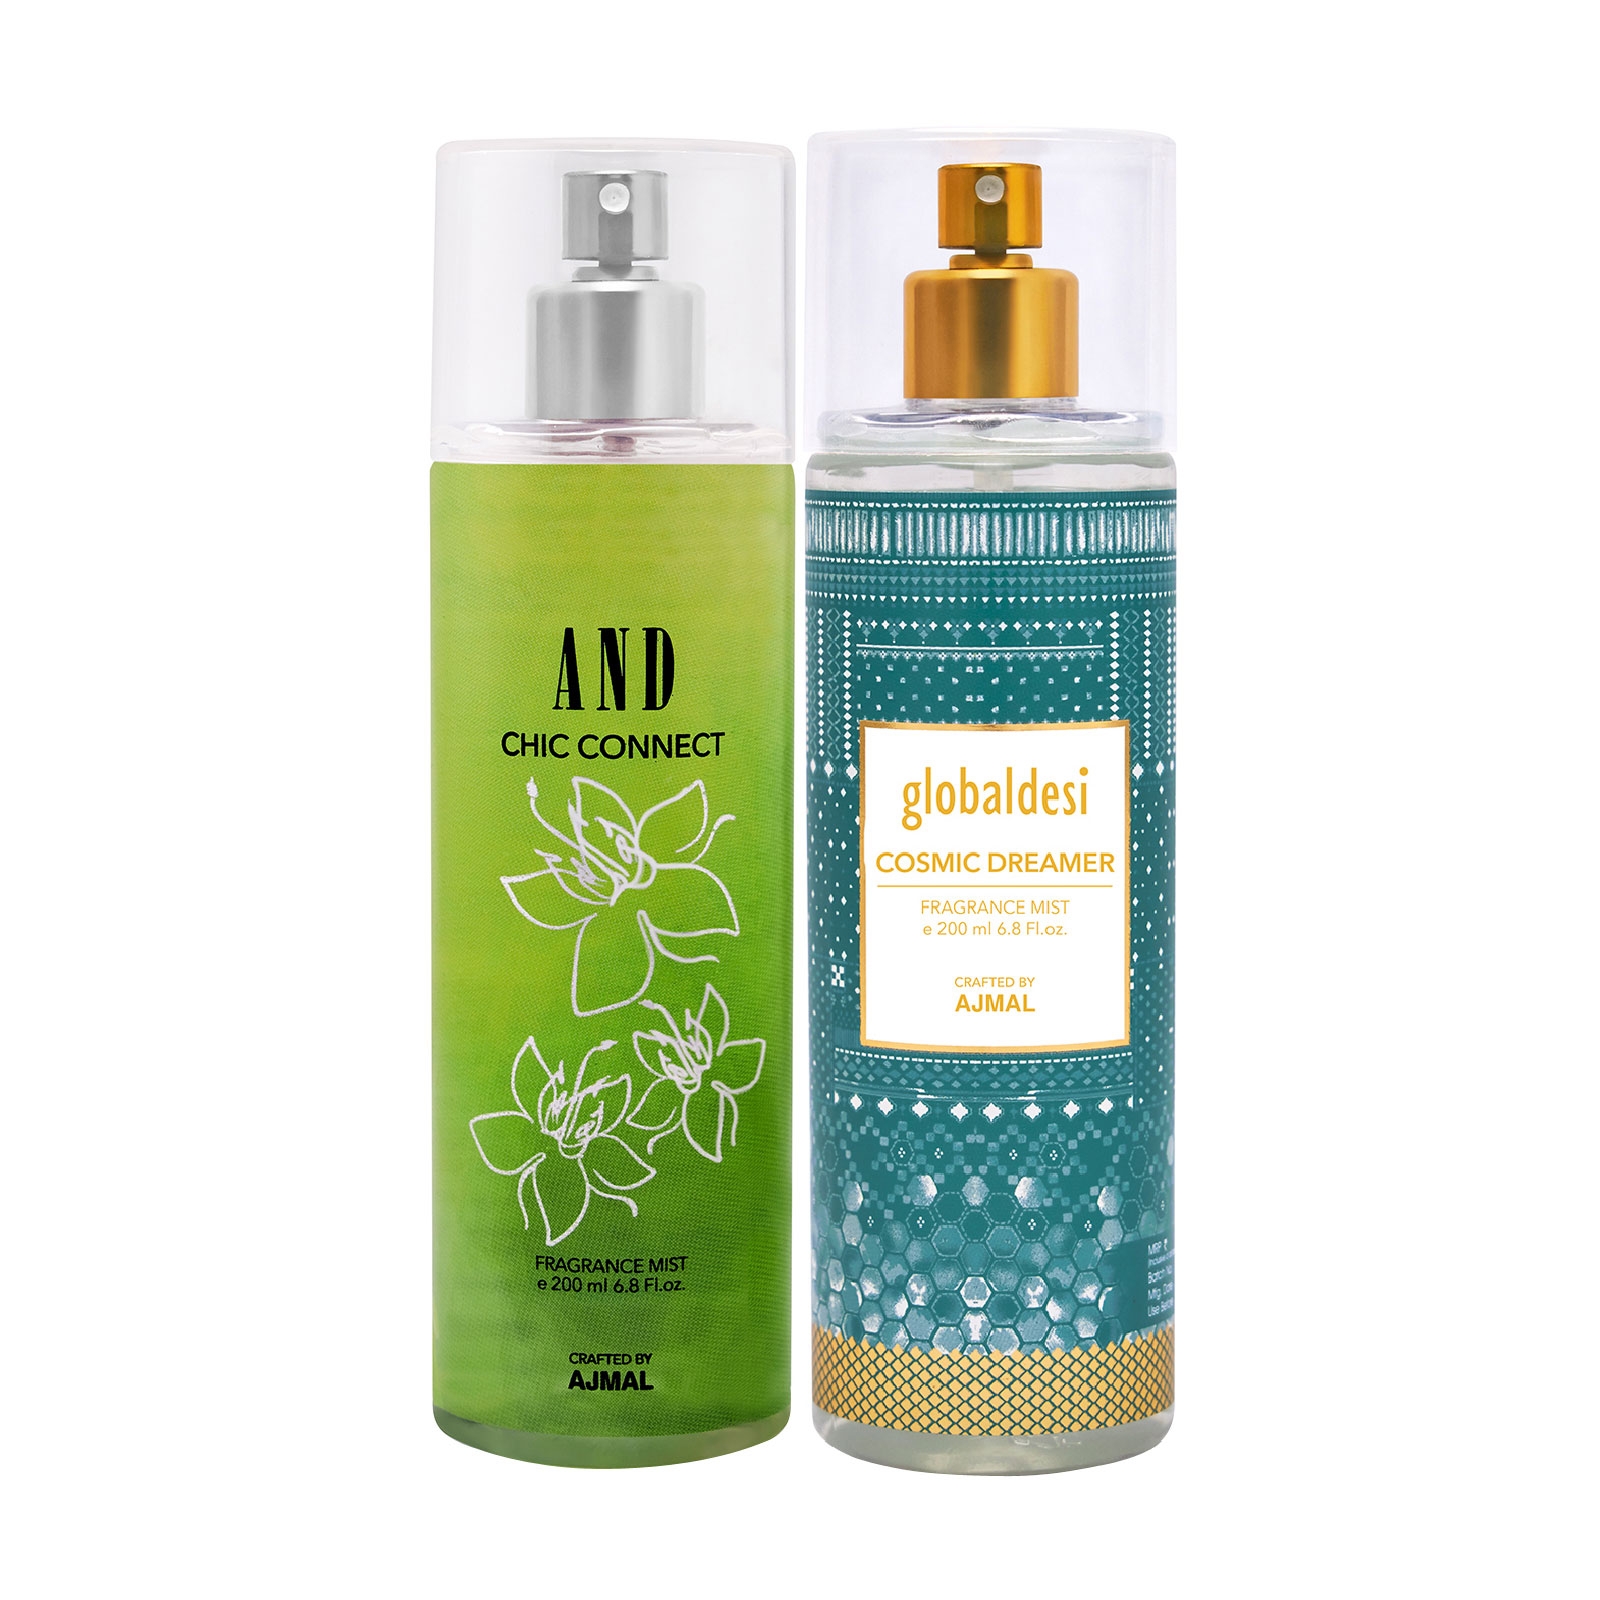 AND Crafted By Ajmal | AND Chi Connect Body Mist 200ML & Global Desi Cosmic Dreamer Body Mist 200ML 